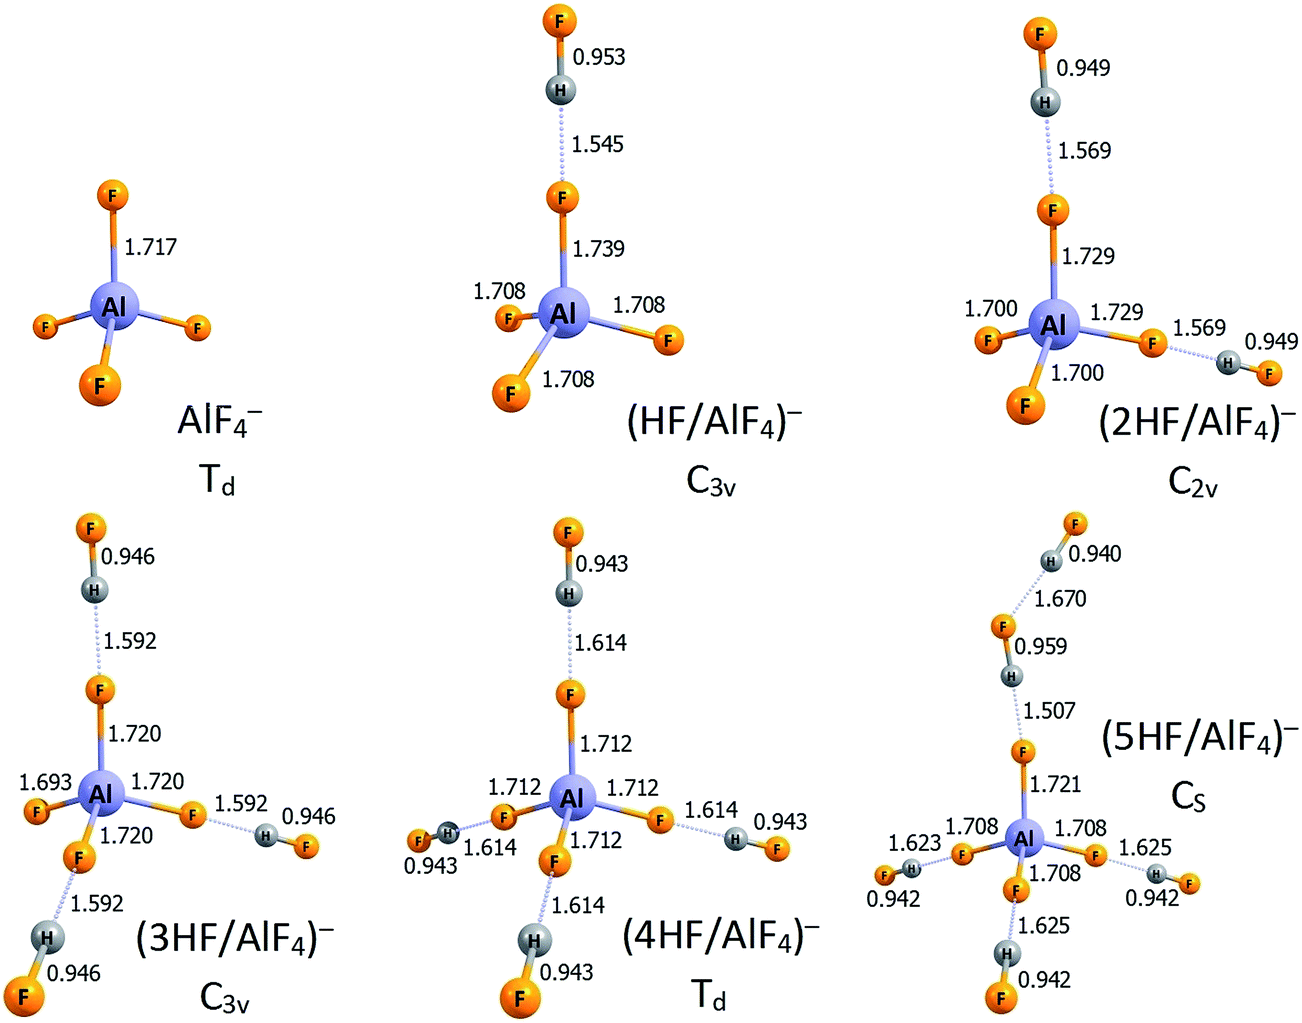 The structures of the lowest energy isomers of the. n. 1)HF/AlF4)- anions. 